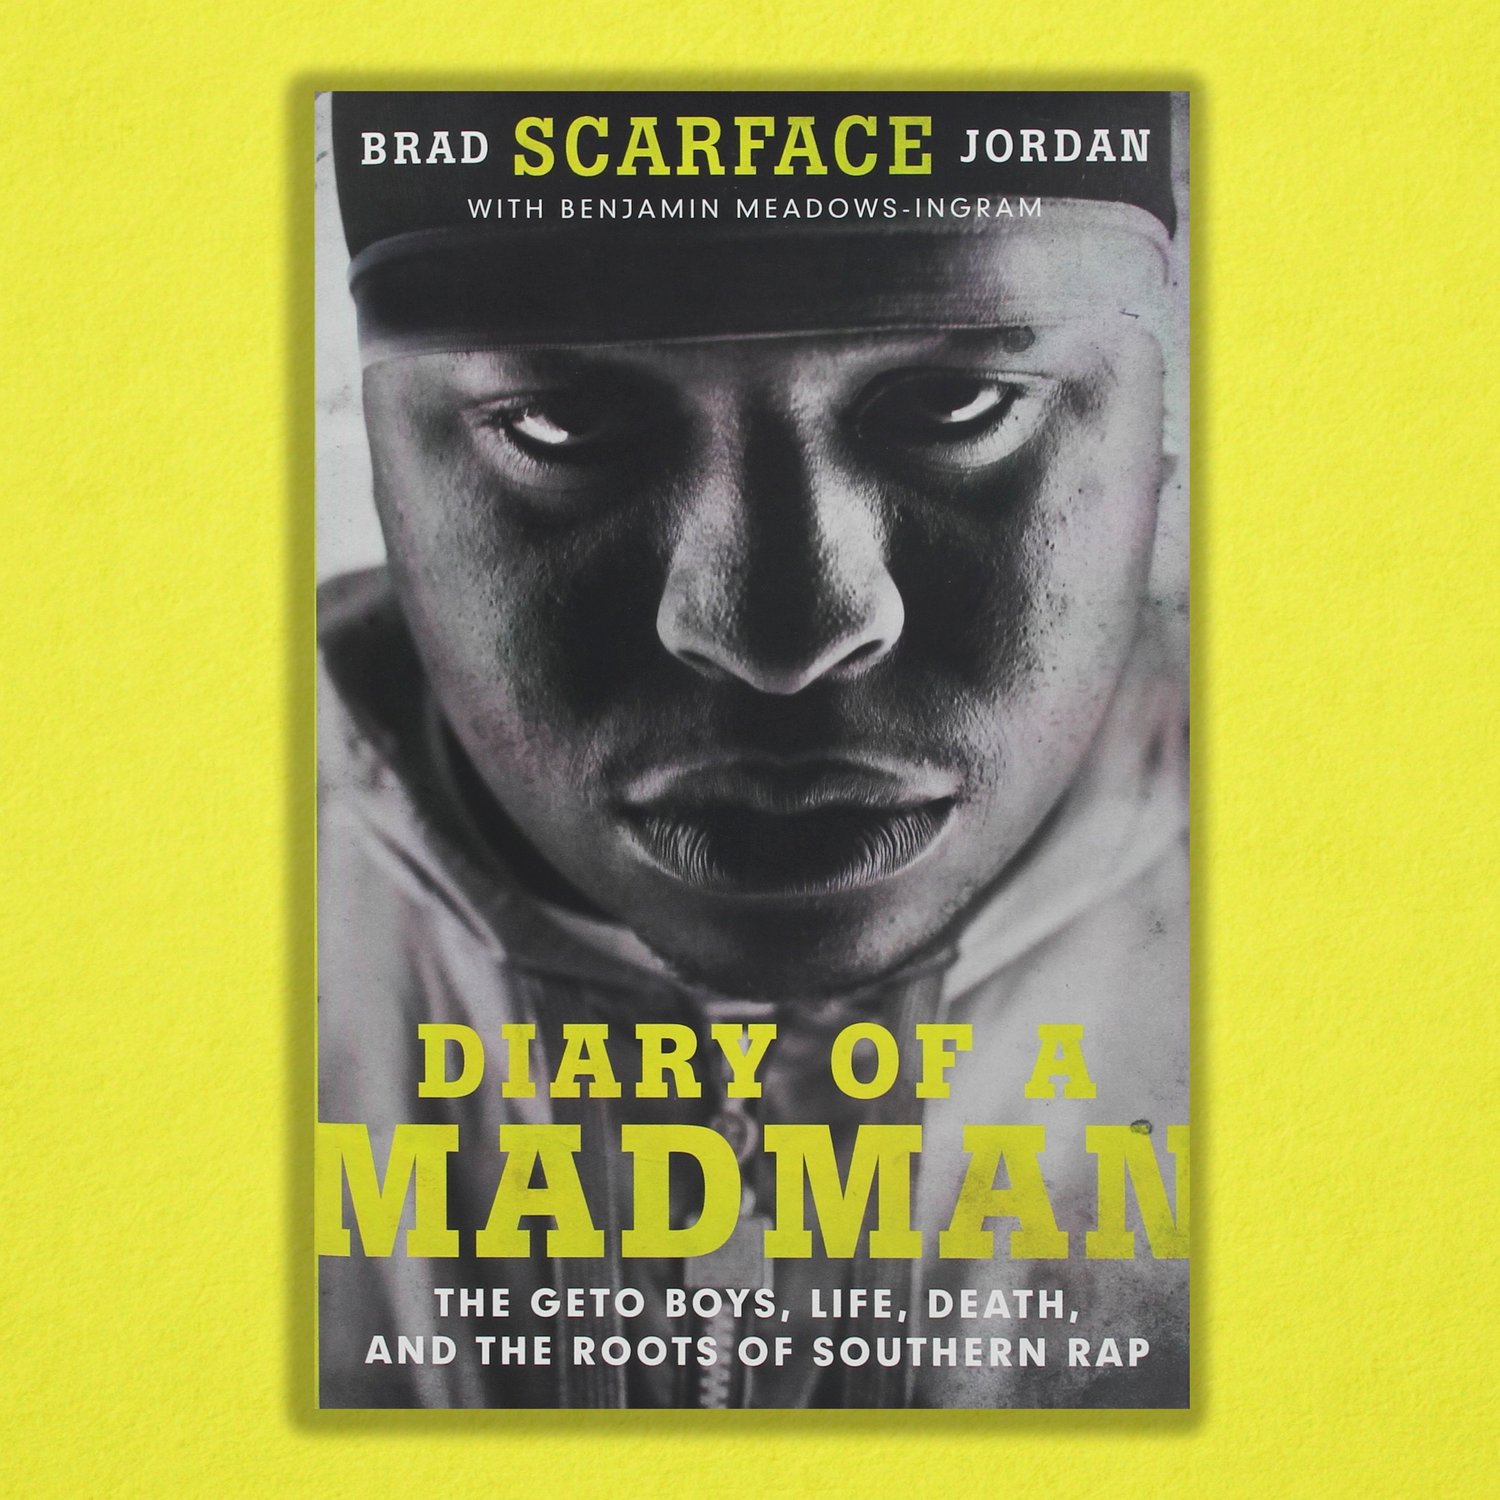 Image of Scarface "Diary of a Madman" Hardcover Book